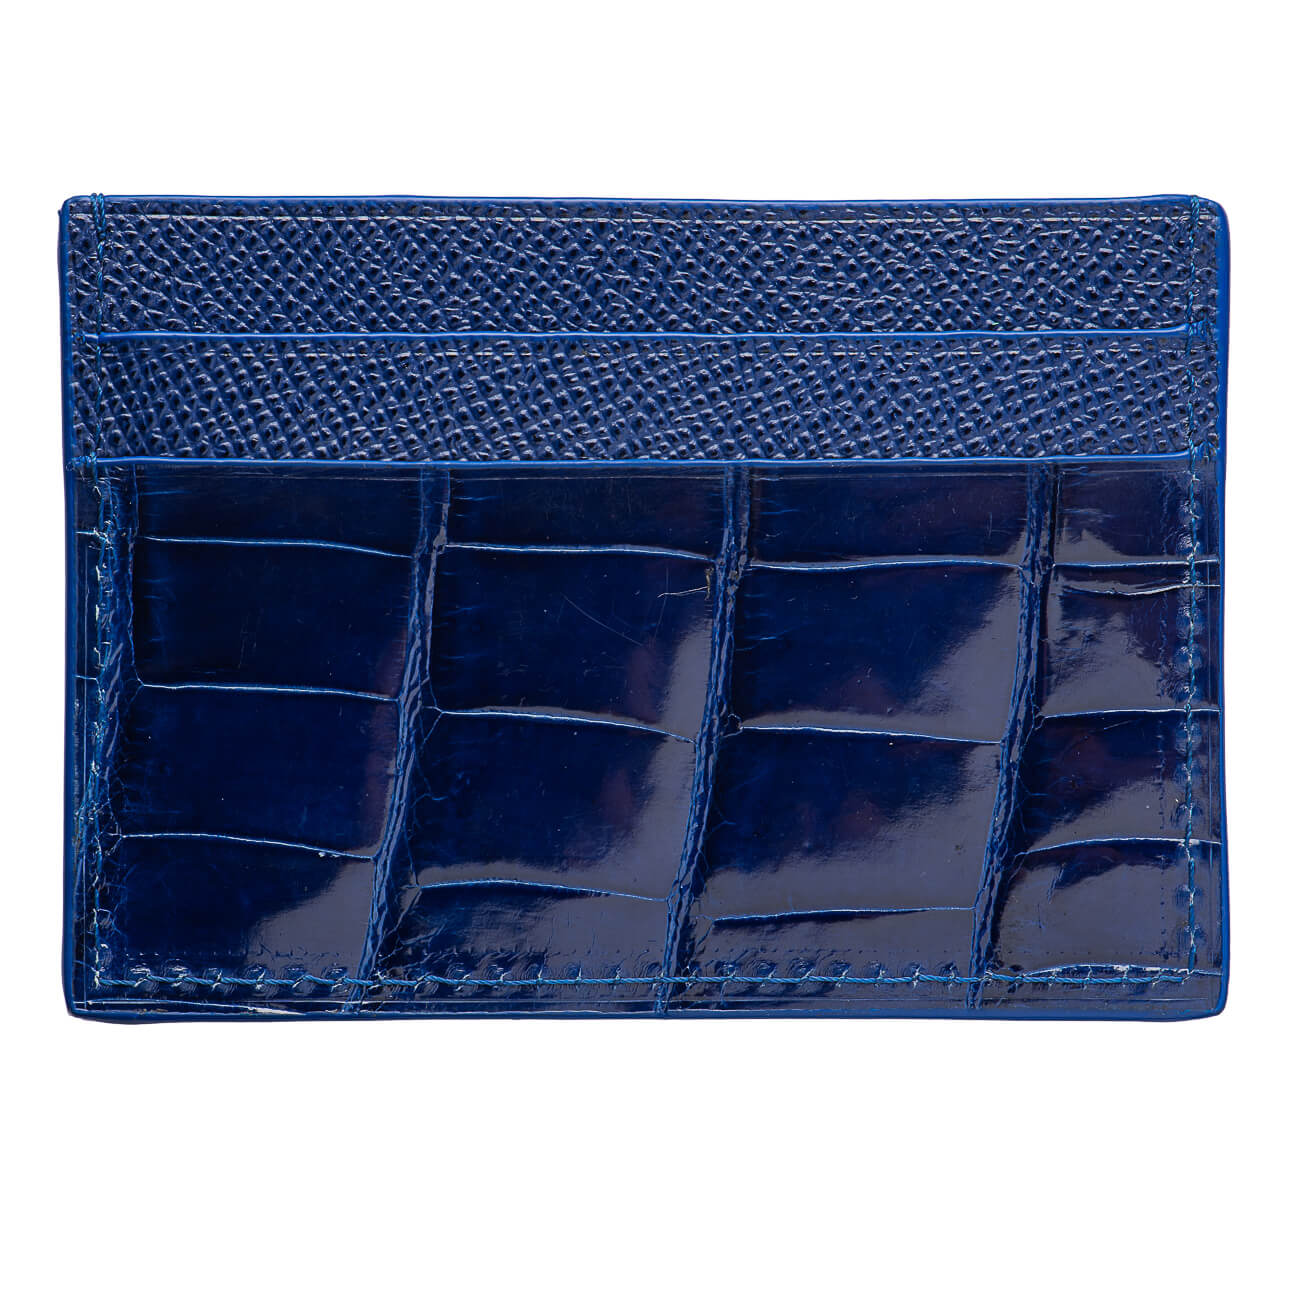 CARD HOLDER ALLIGATOR LACQUER ELECTRIC